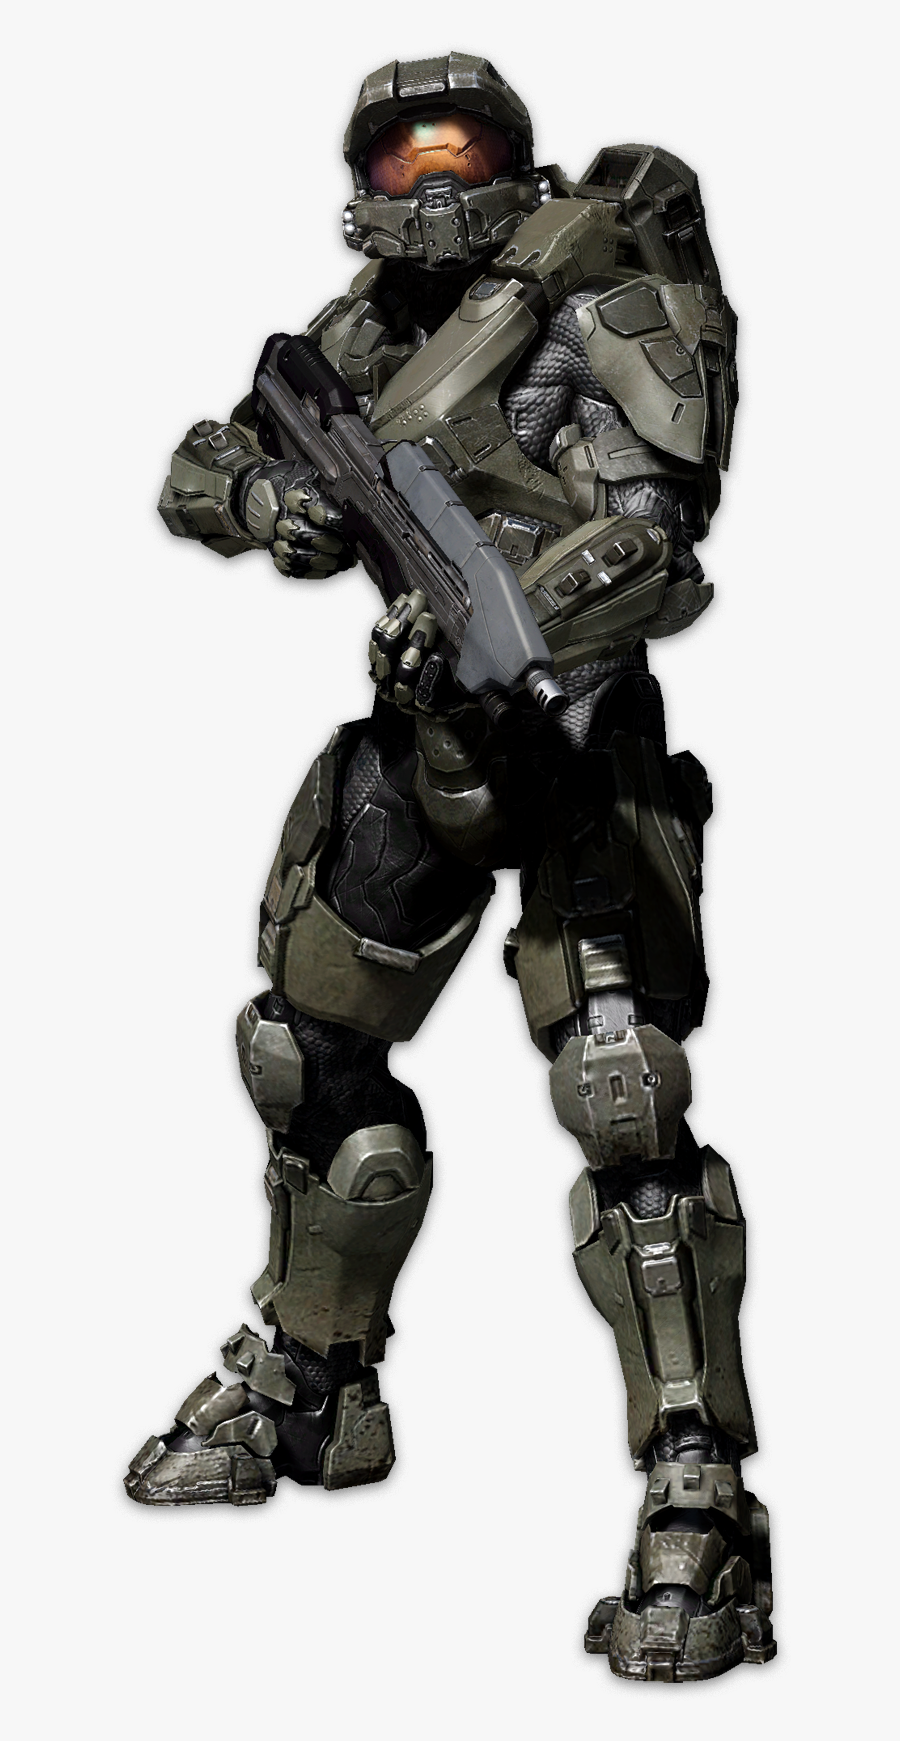 Image - Halo Master Chief Png, Transparent Clipart